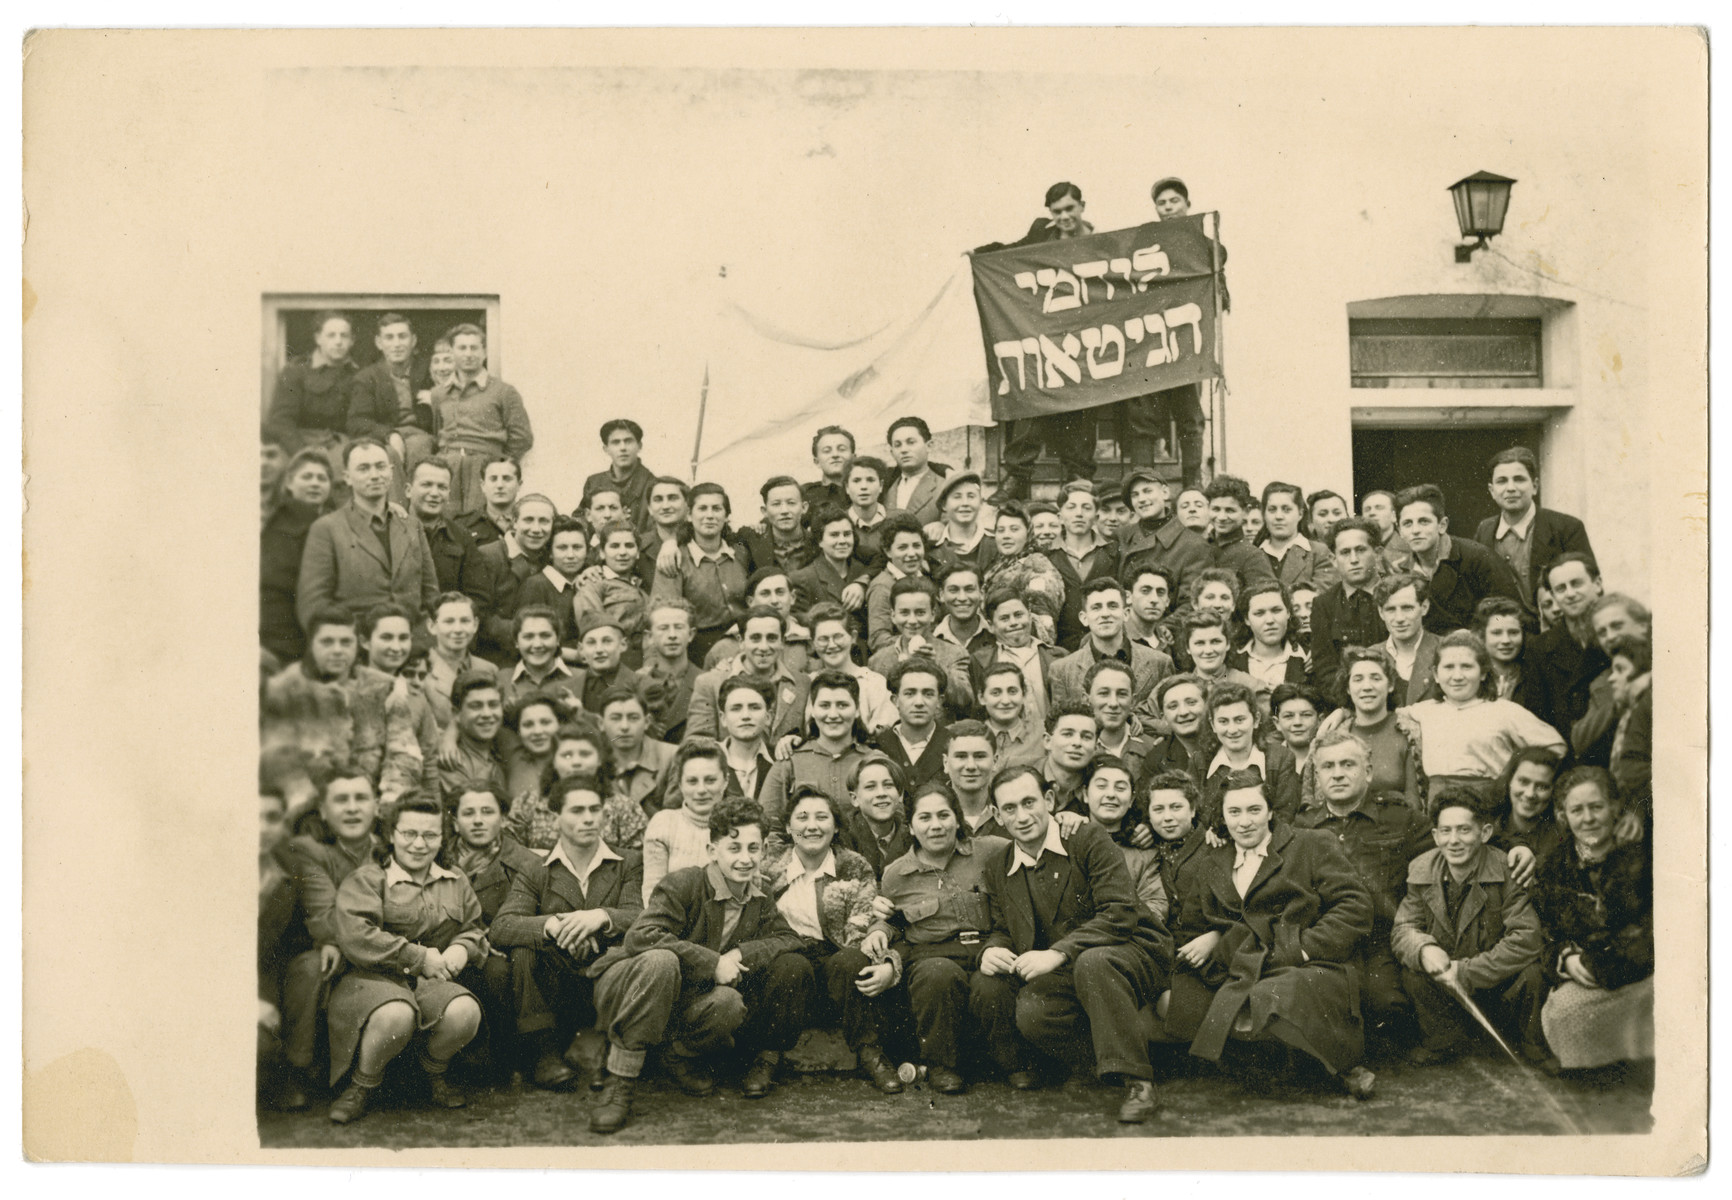 A large group of Jewish displaced persons poses in front of a banner that says "Ghetto Fighters."